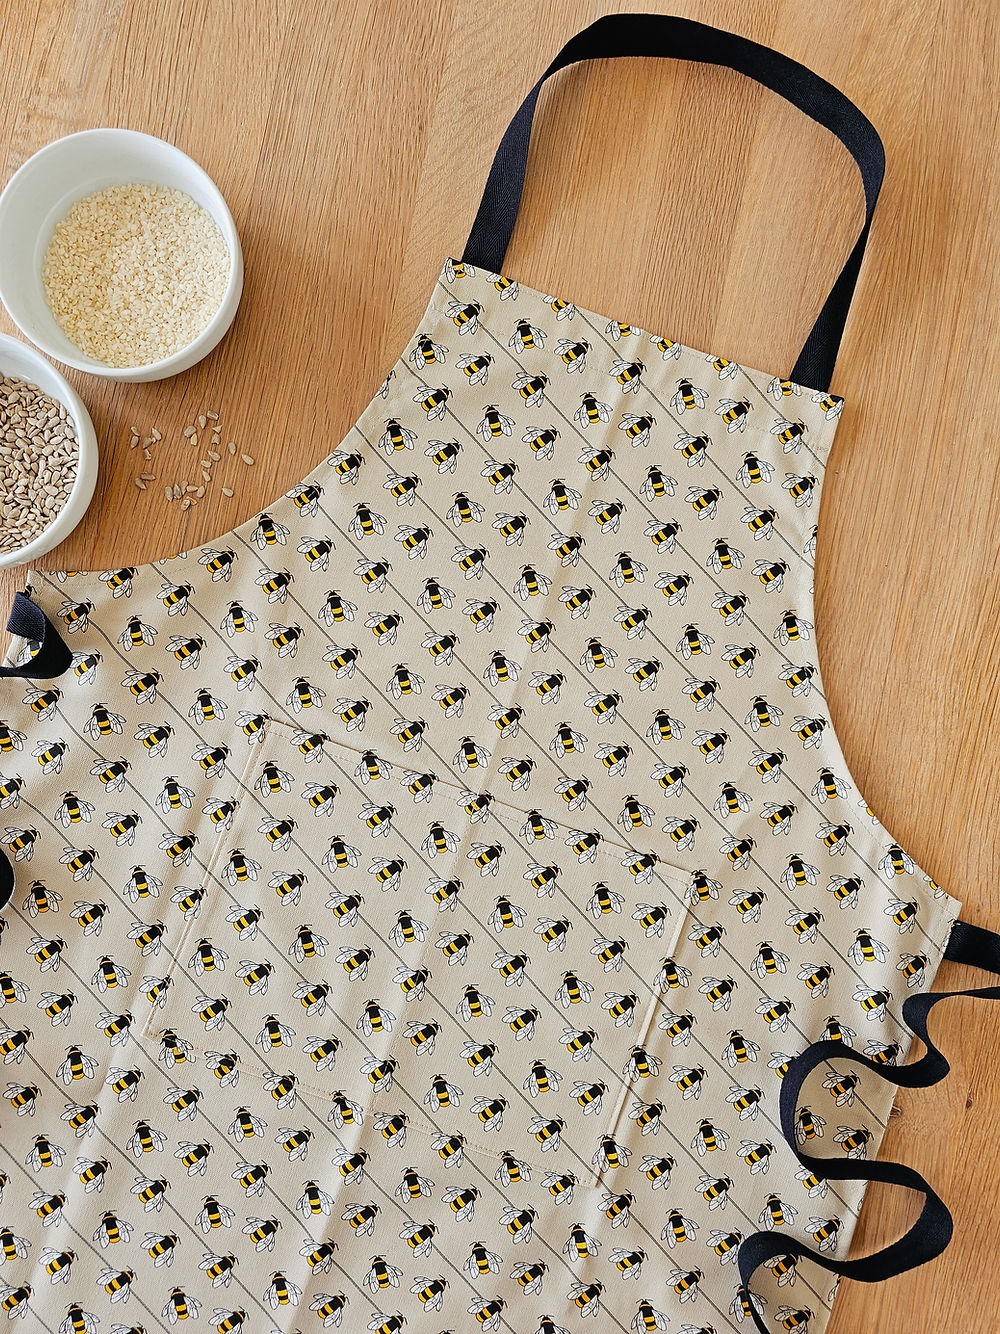 Product picture of Bee Apron